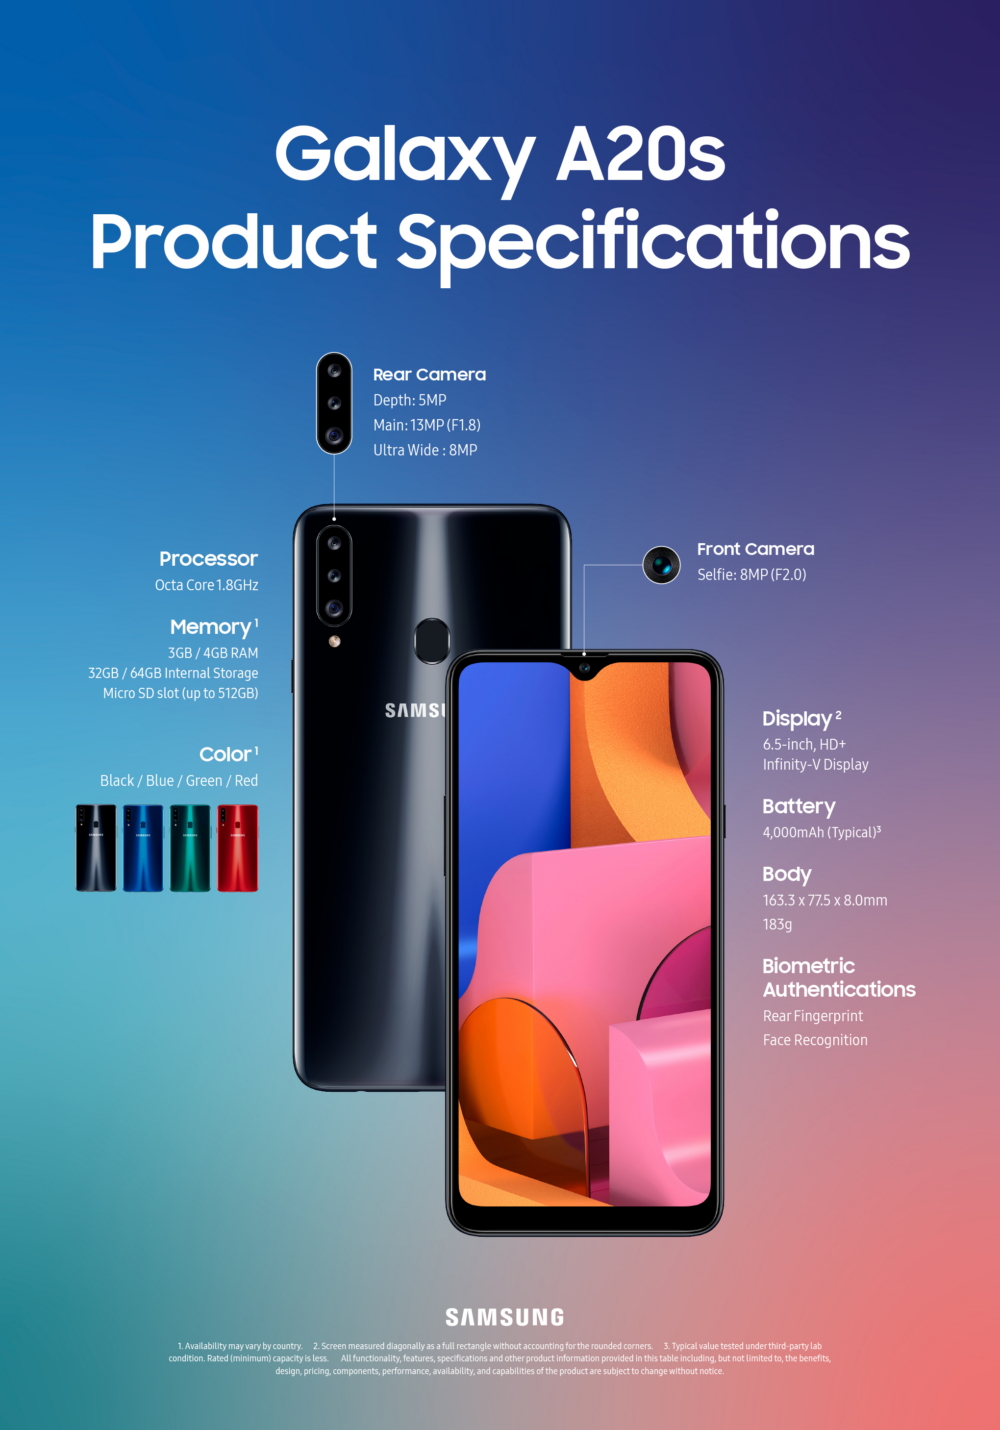 [Infographic] Galaxy A20s: Meet the Essential Device for the Era of Live